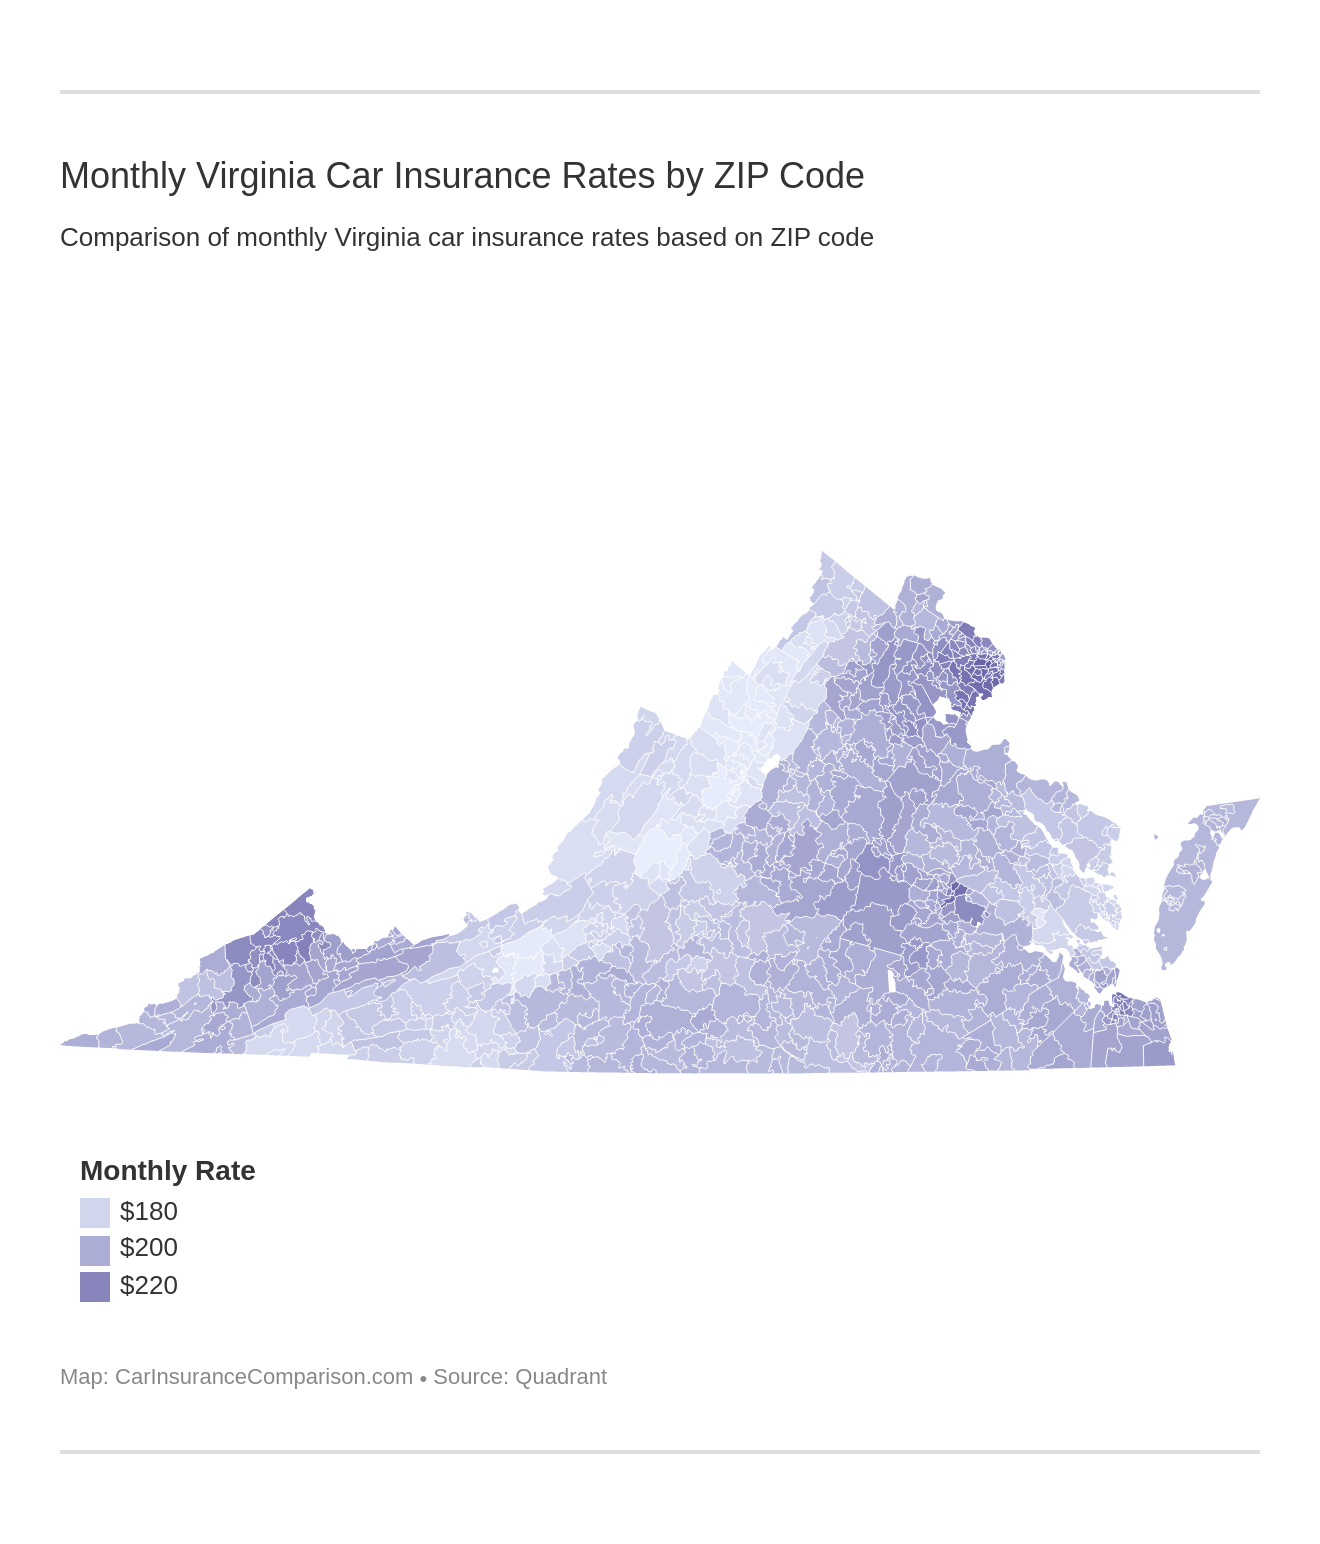 Monthly Virginia Car Insurance Rates by ZIP Code